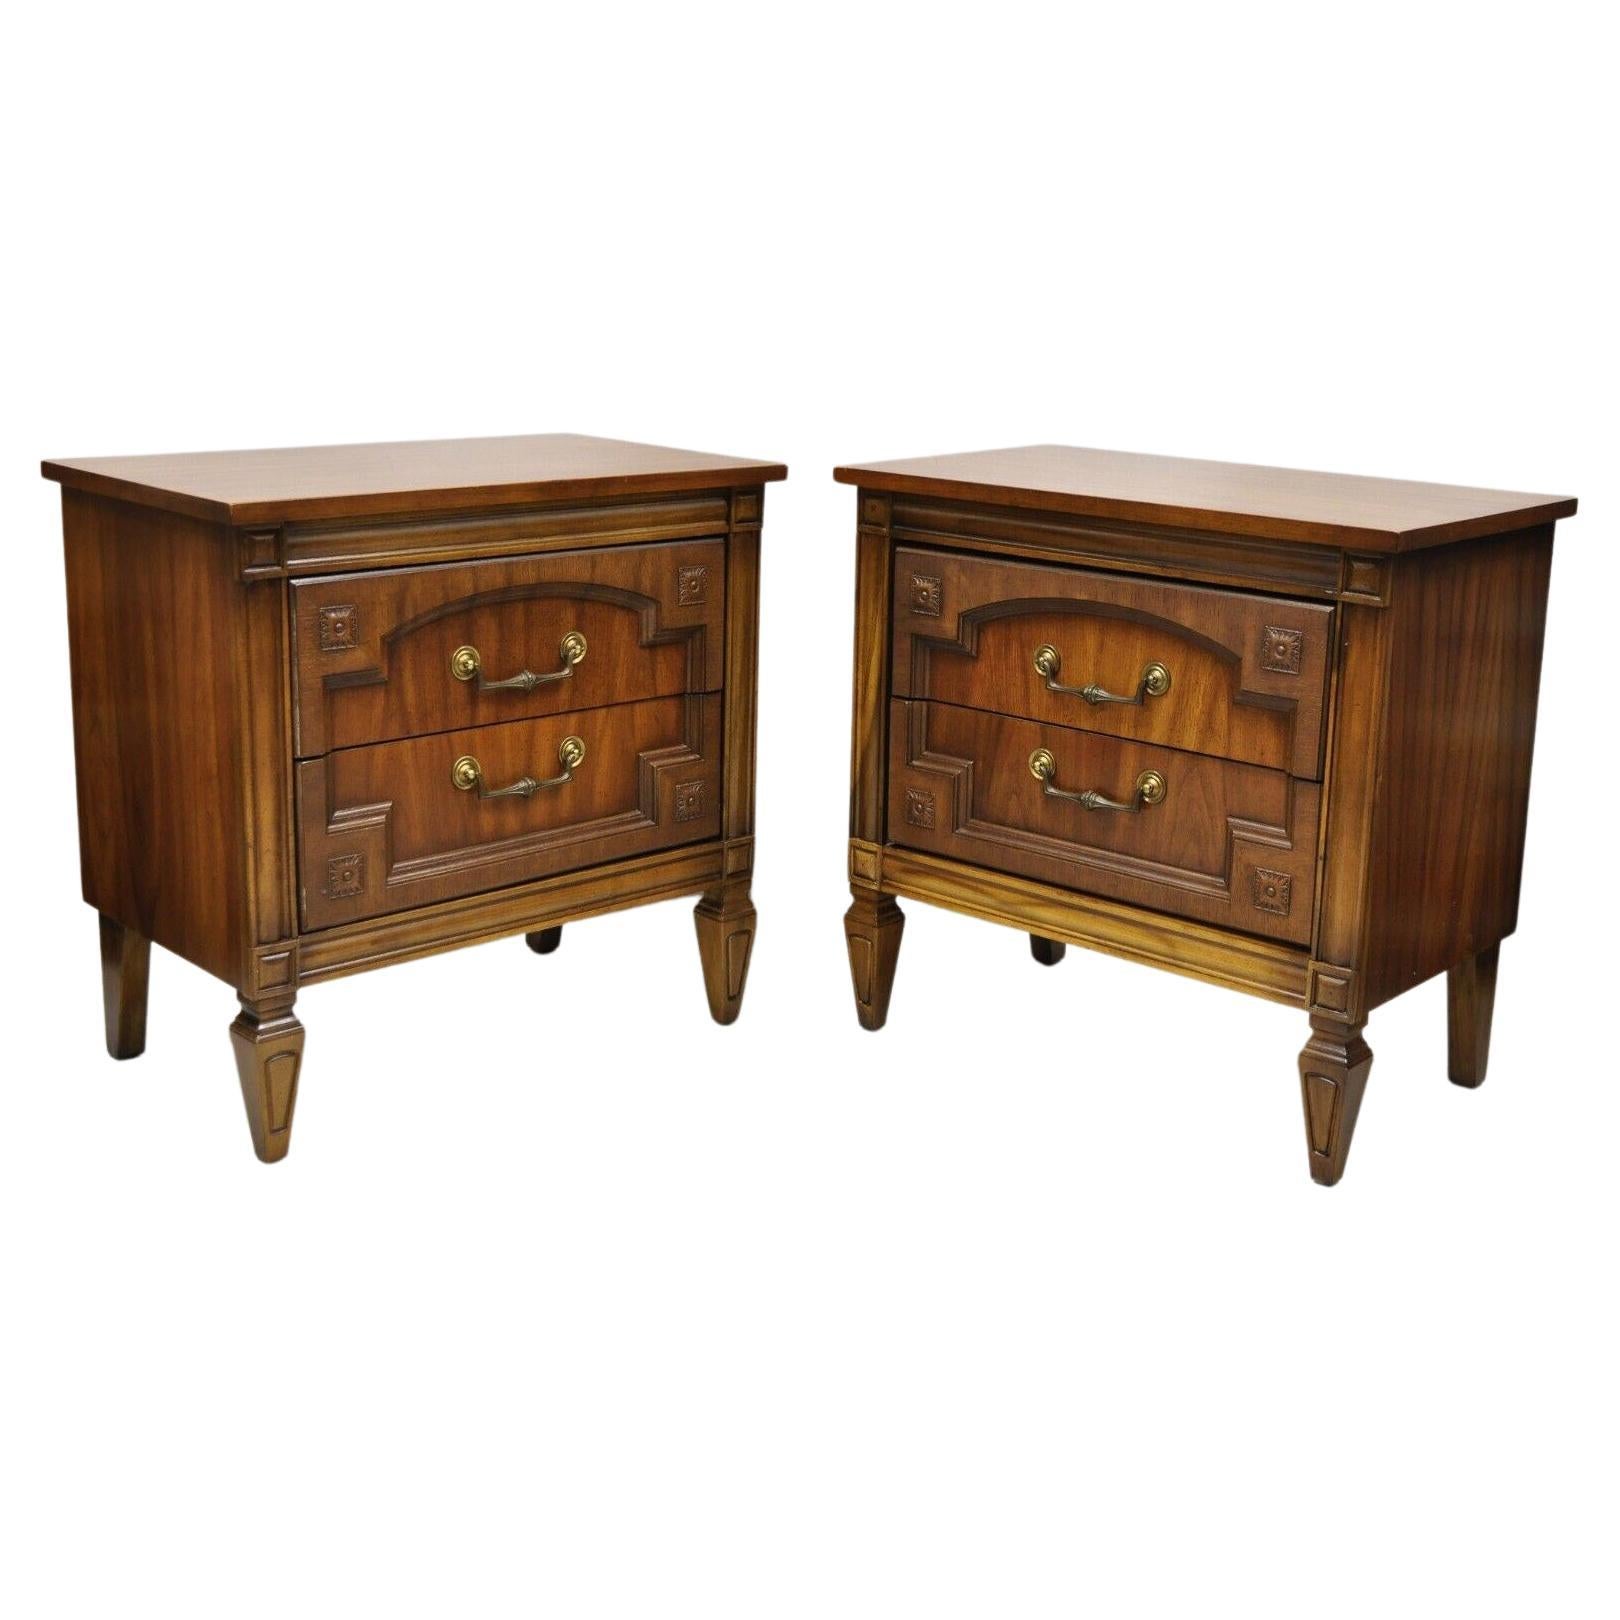 Vintage French Hollywood Regency Style 2 Drawer Nightstand Bedside Table, Pair